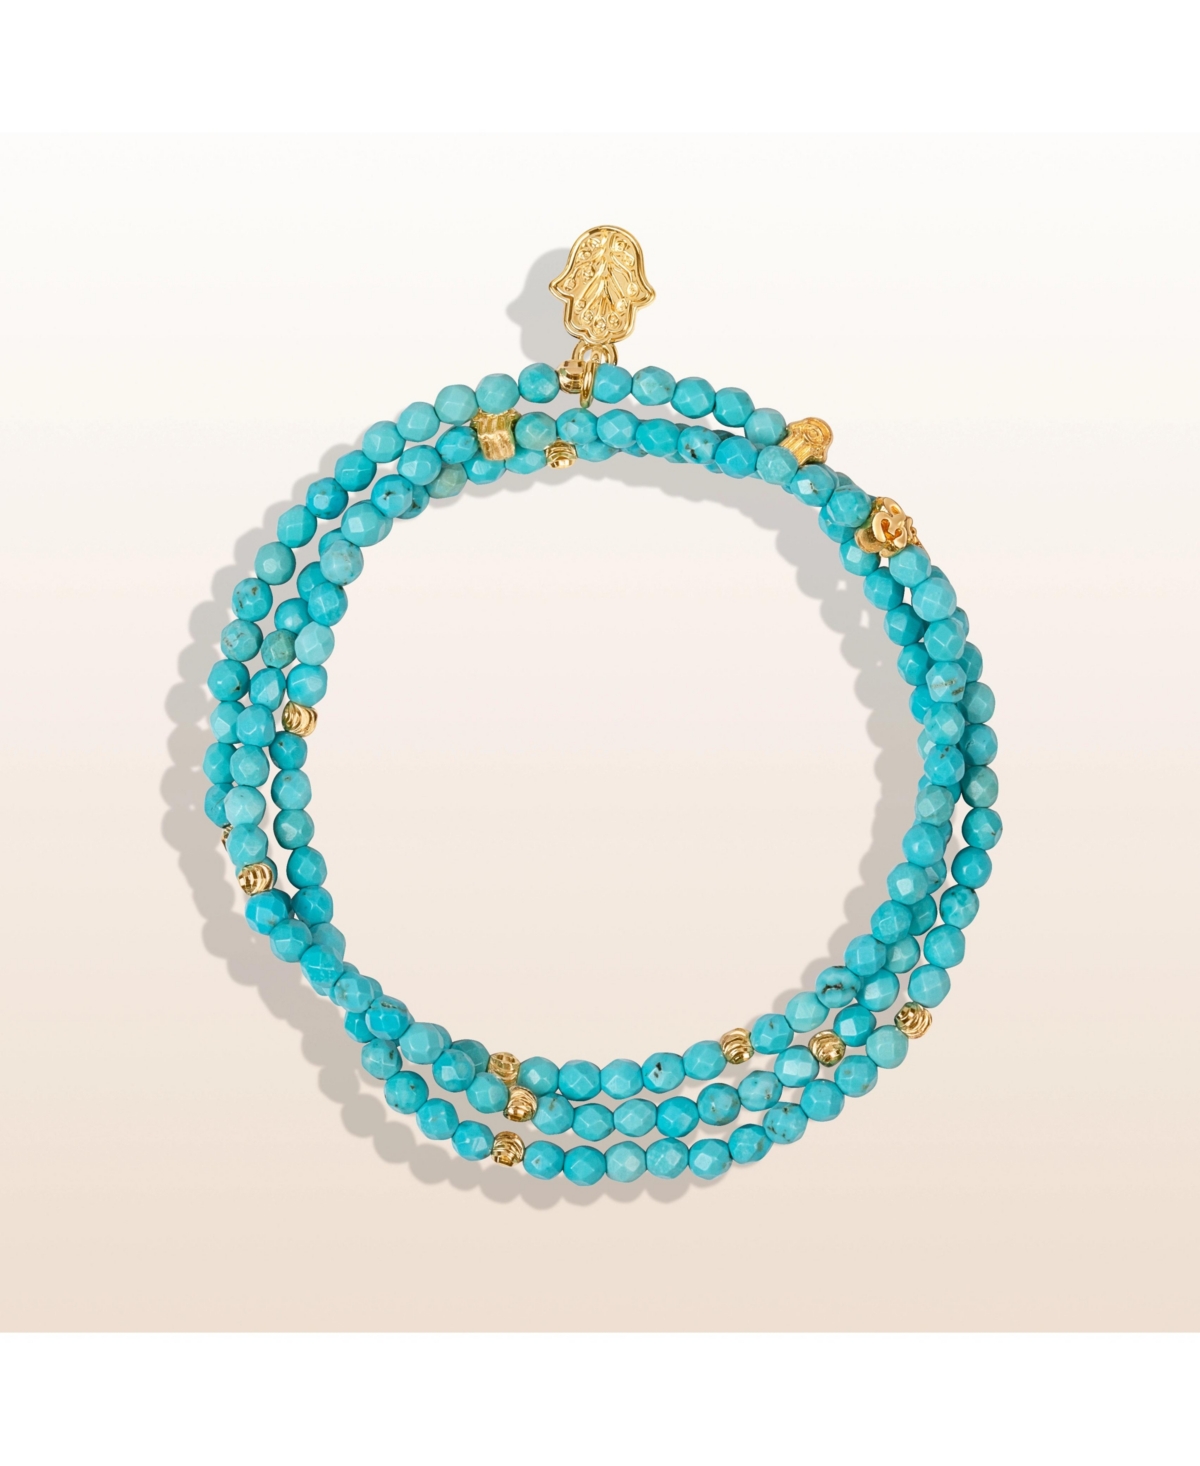 Blessed Tranquility Turquoise Wrap - Turquoise/gold